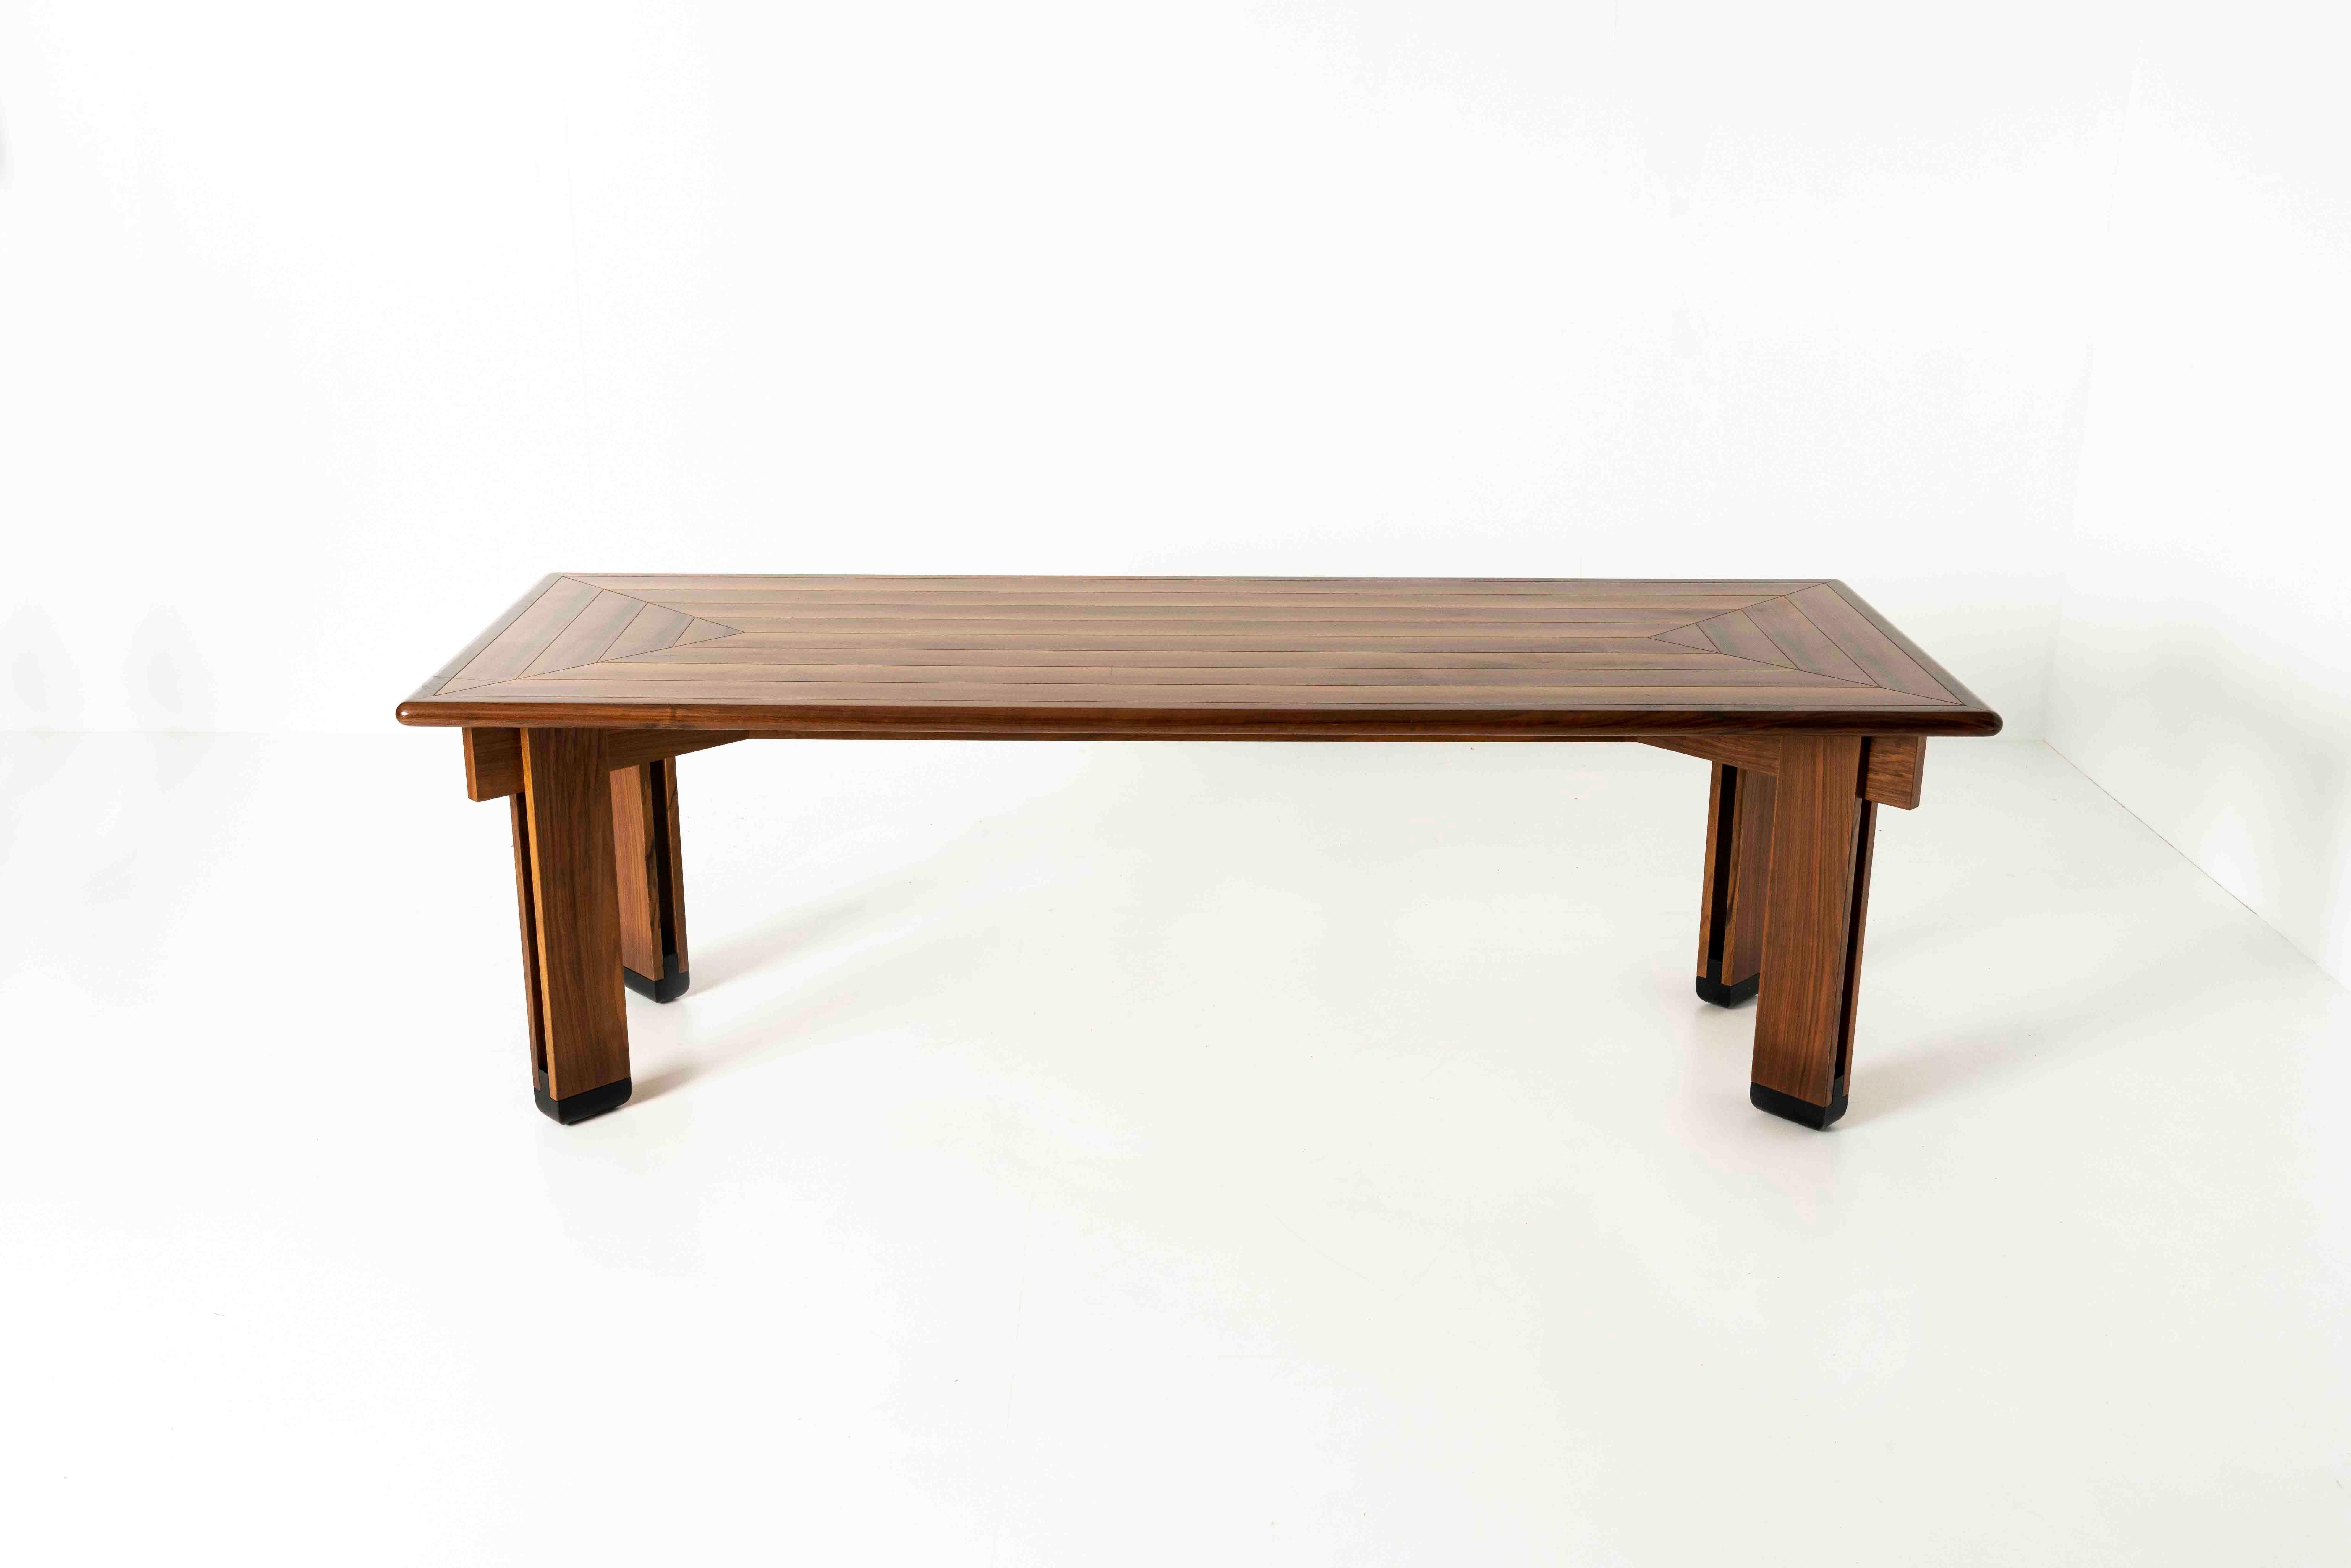 Impressive dining table iby Ico Parisi for Brugnoli Mobili Cantù from Italy, the 1950s. This table has a base with well-designed legs that feature a vertical lining and we think it is walnut. The top has an inlay of wood in a pattern. The table is